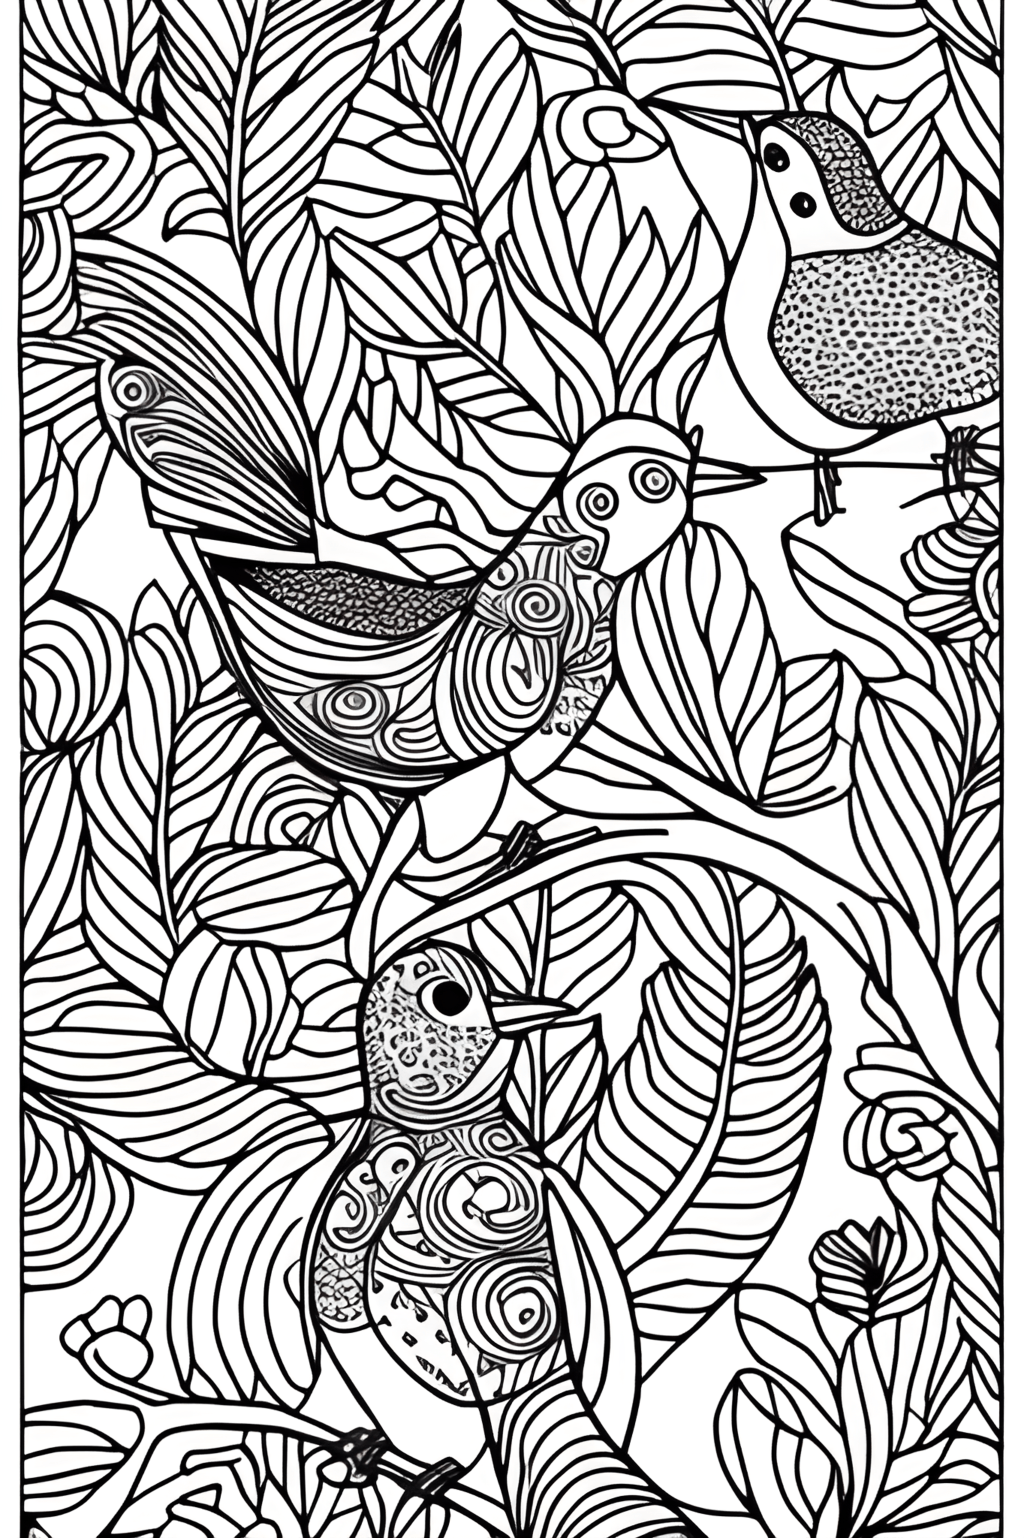 Birds Coloring Page Black and White · Creative Fabrica